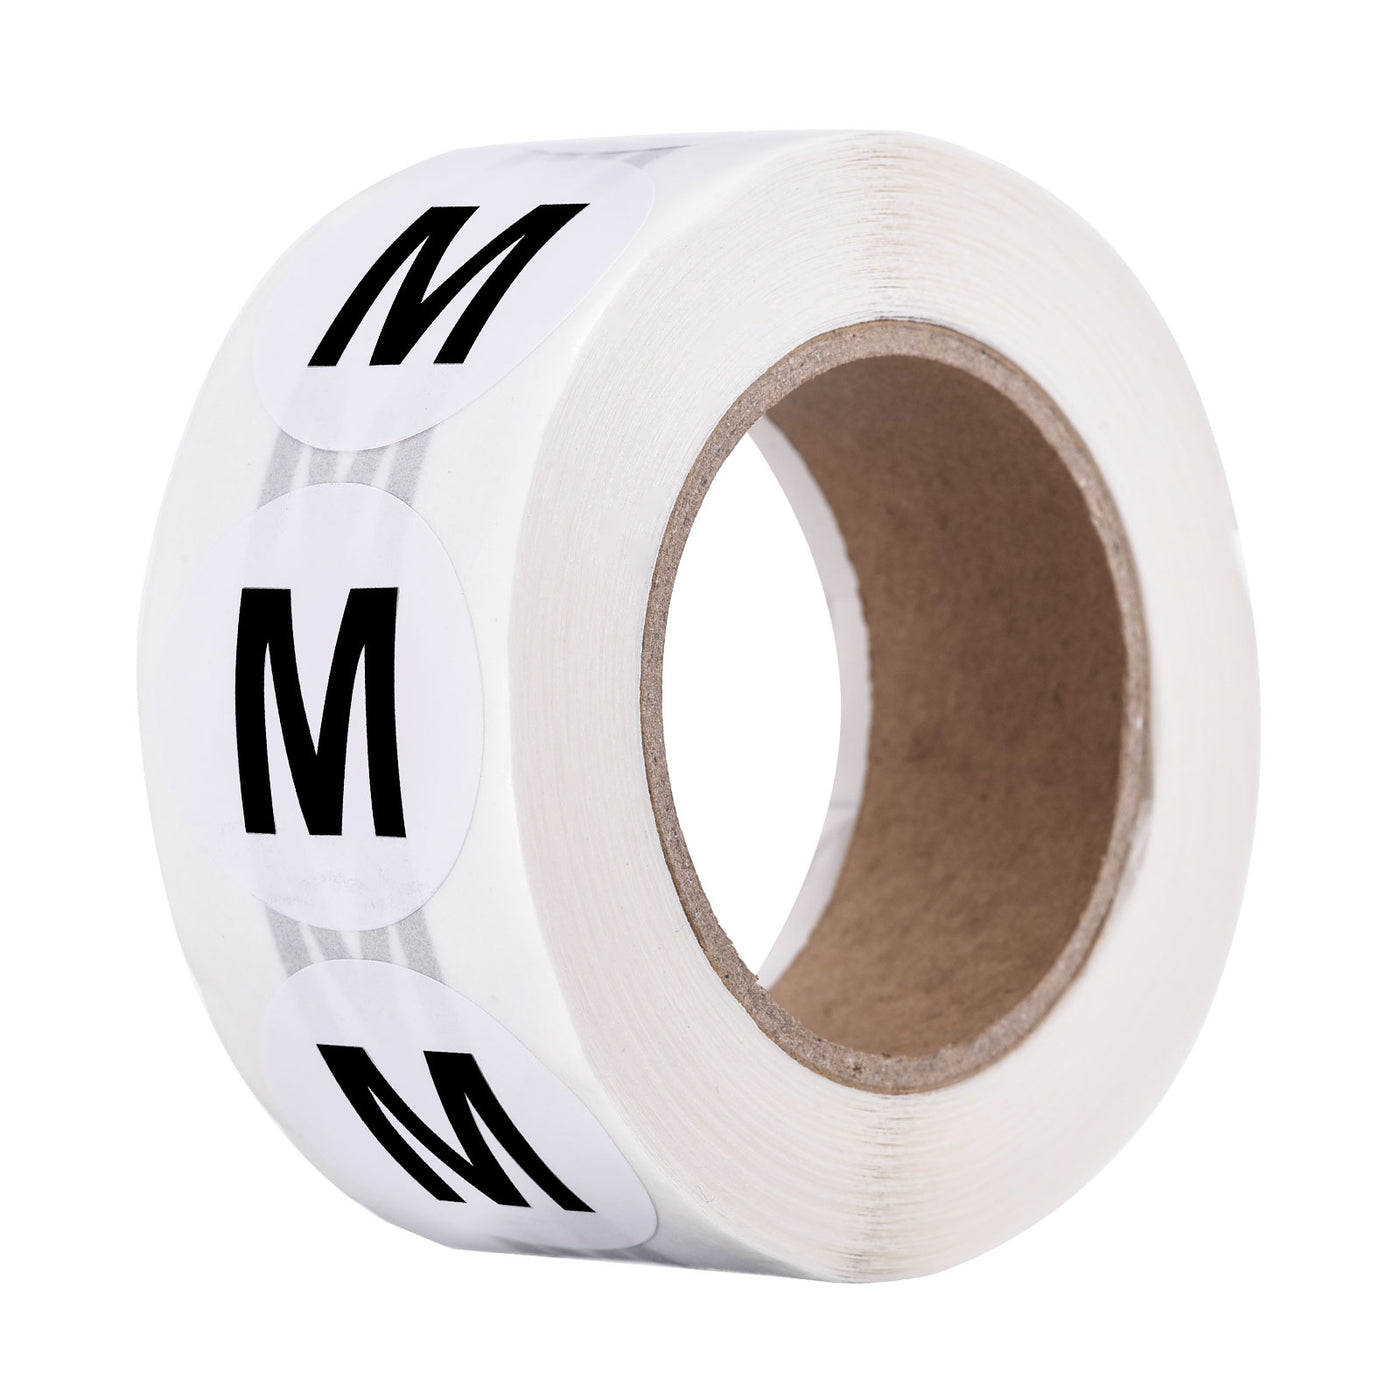 Harfington Clothing M Medium Size Sticker Label Coding Label 25mm/1inch Dia 1 Roll 500 Round Adhesive Labels for Clothes Apparel